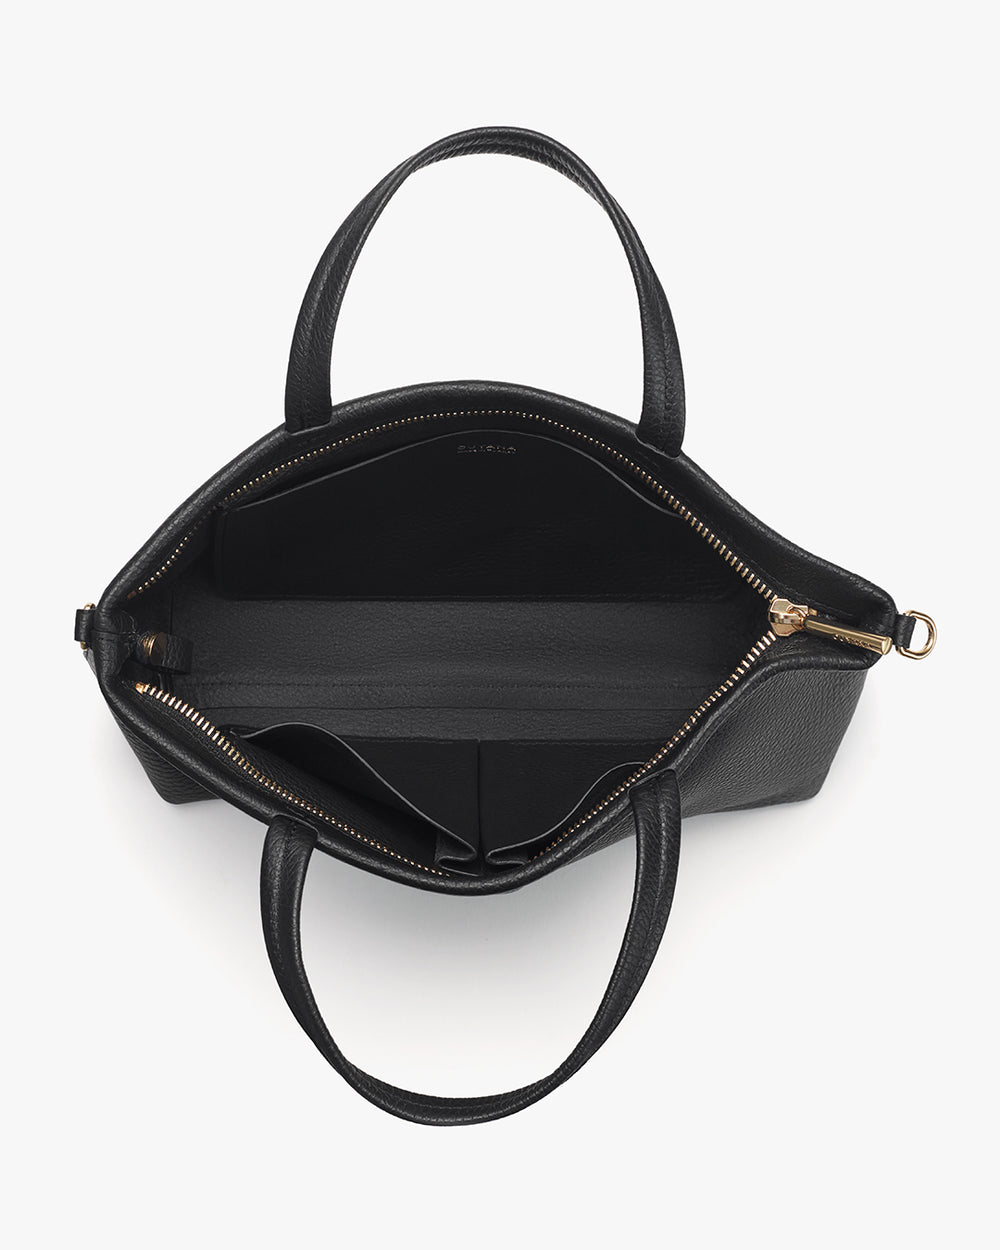 Top view of an open handbag with zipper and two handles.